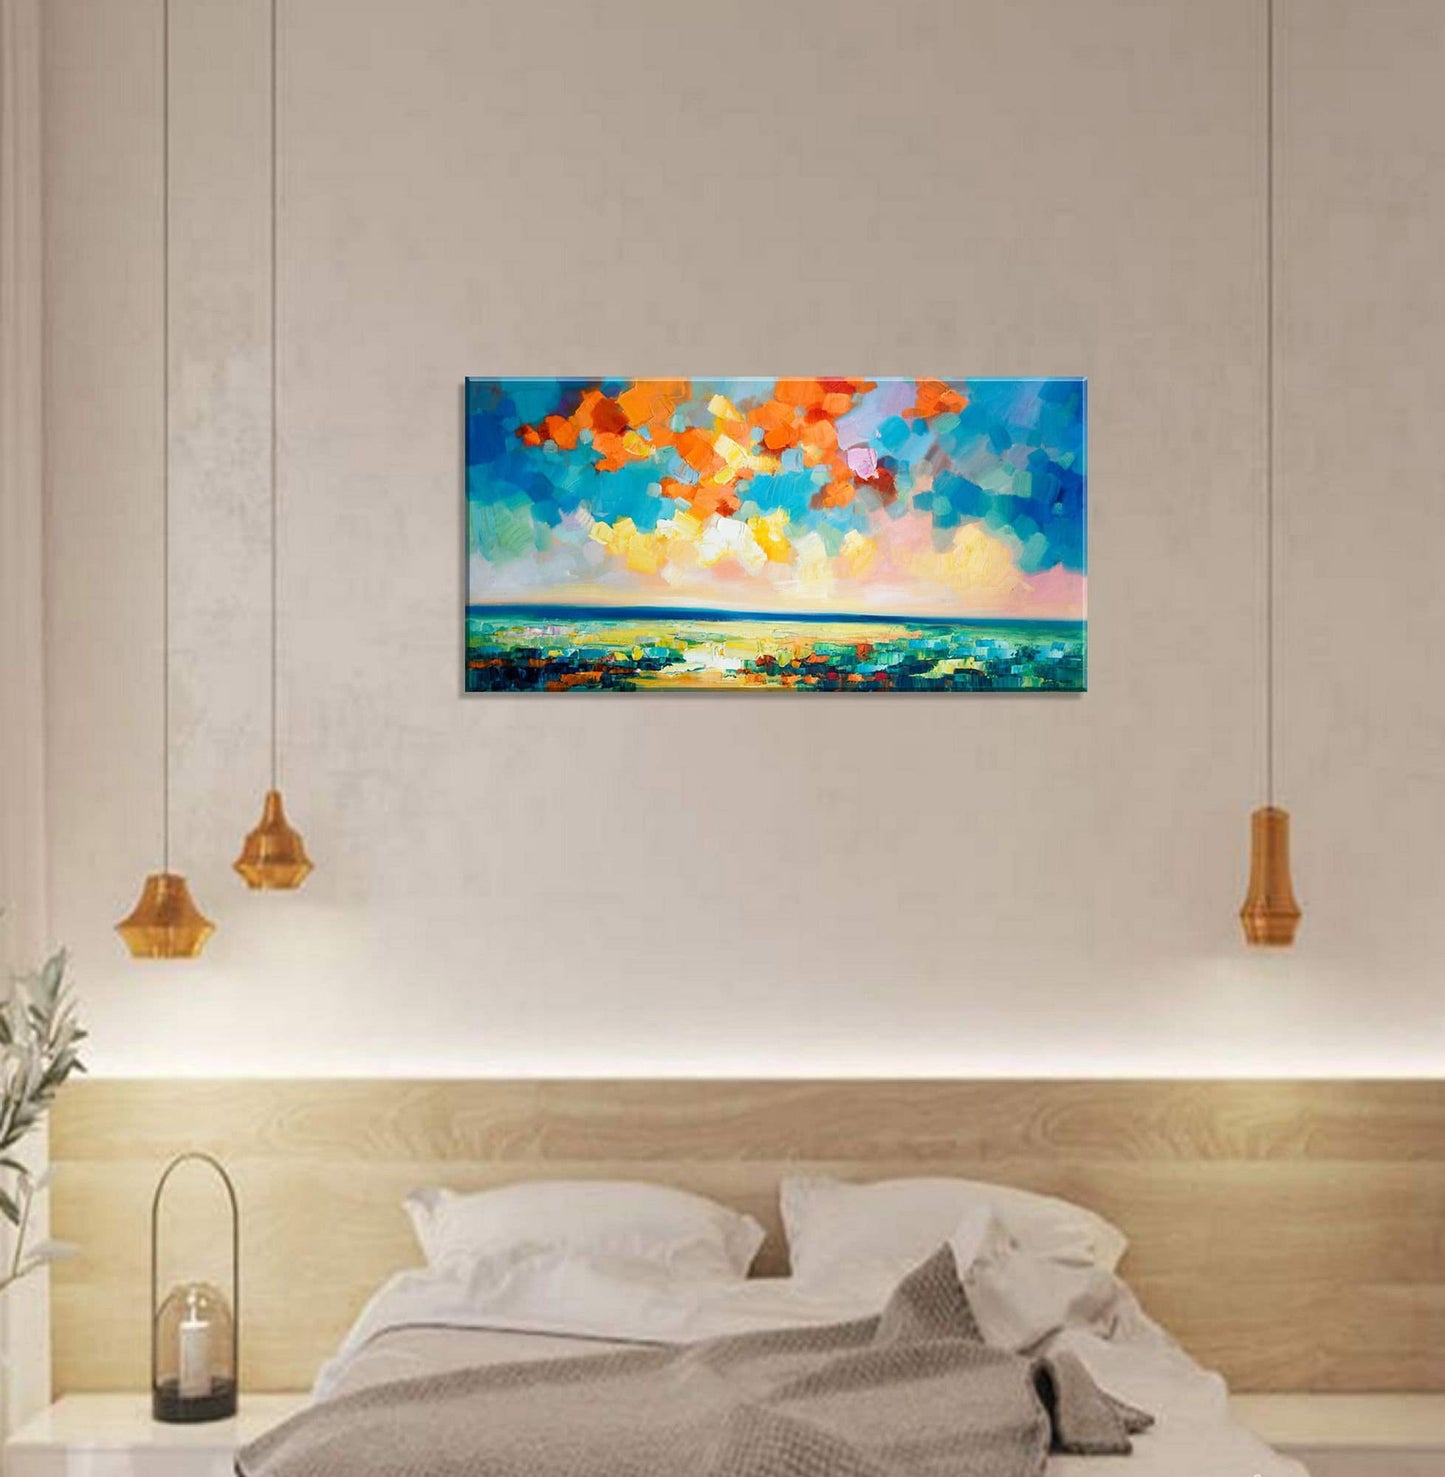 Large Art, Bedroom Art, Abstract Art, Original Artwork, Abstract Landscape Painting, Modern Painting, Abstract Canvas Art, Wall Decor